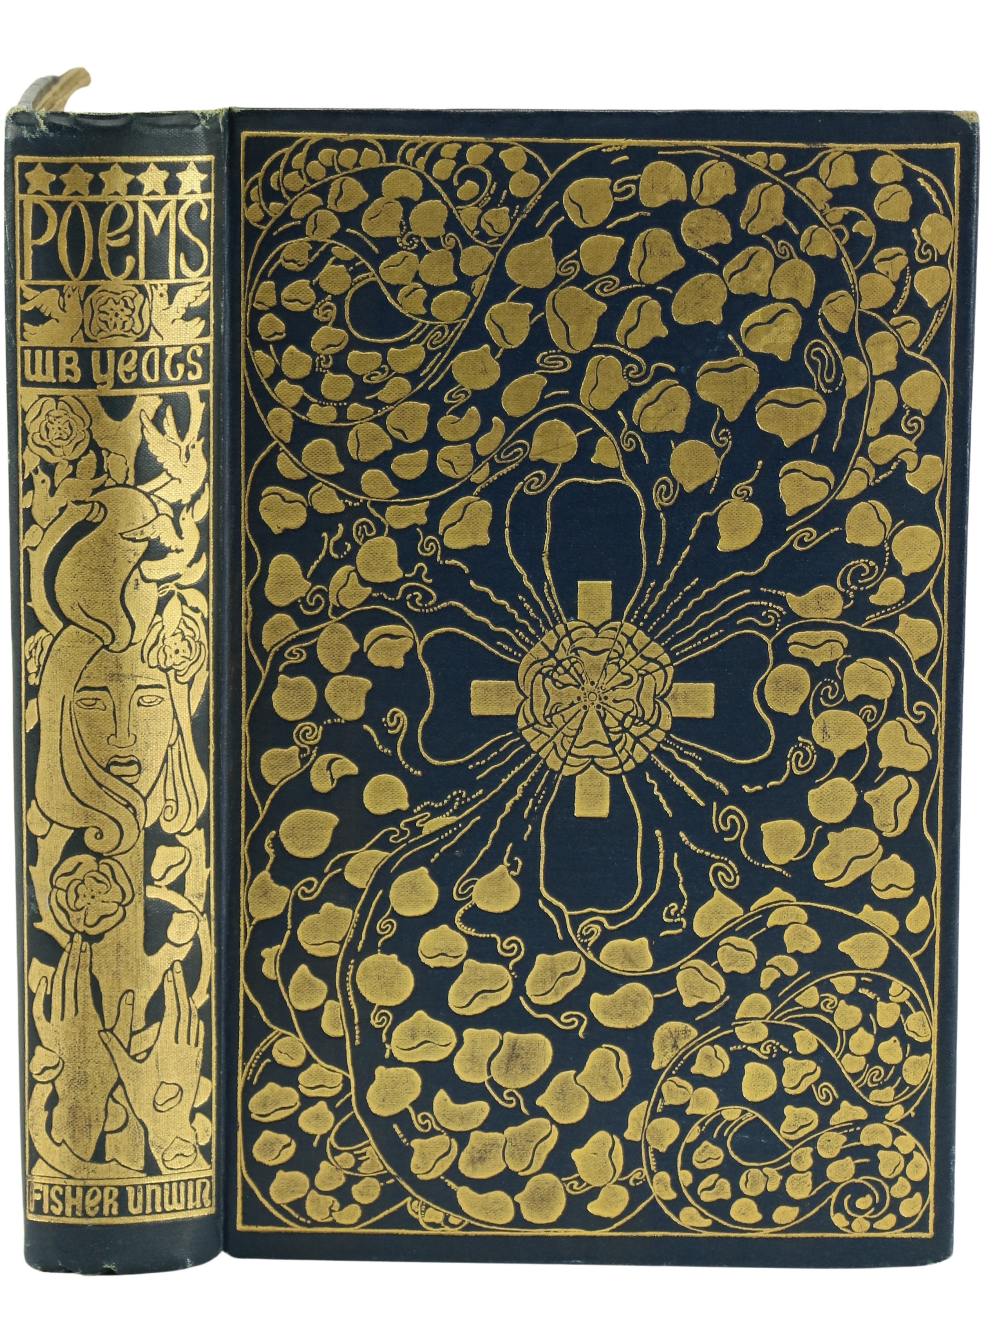 Yeats (W.B.) Poems, 8vo, L. (T. Fisher Unwin) 1904, First Edn., hf. title, portrait frontis,